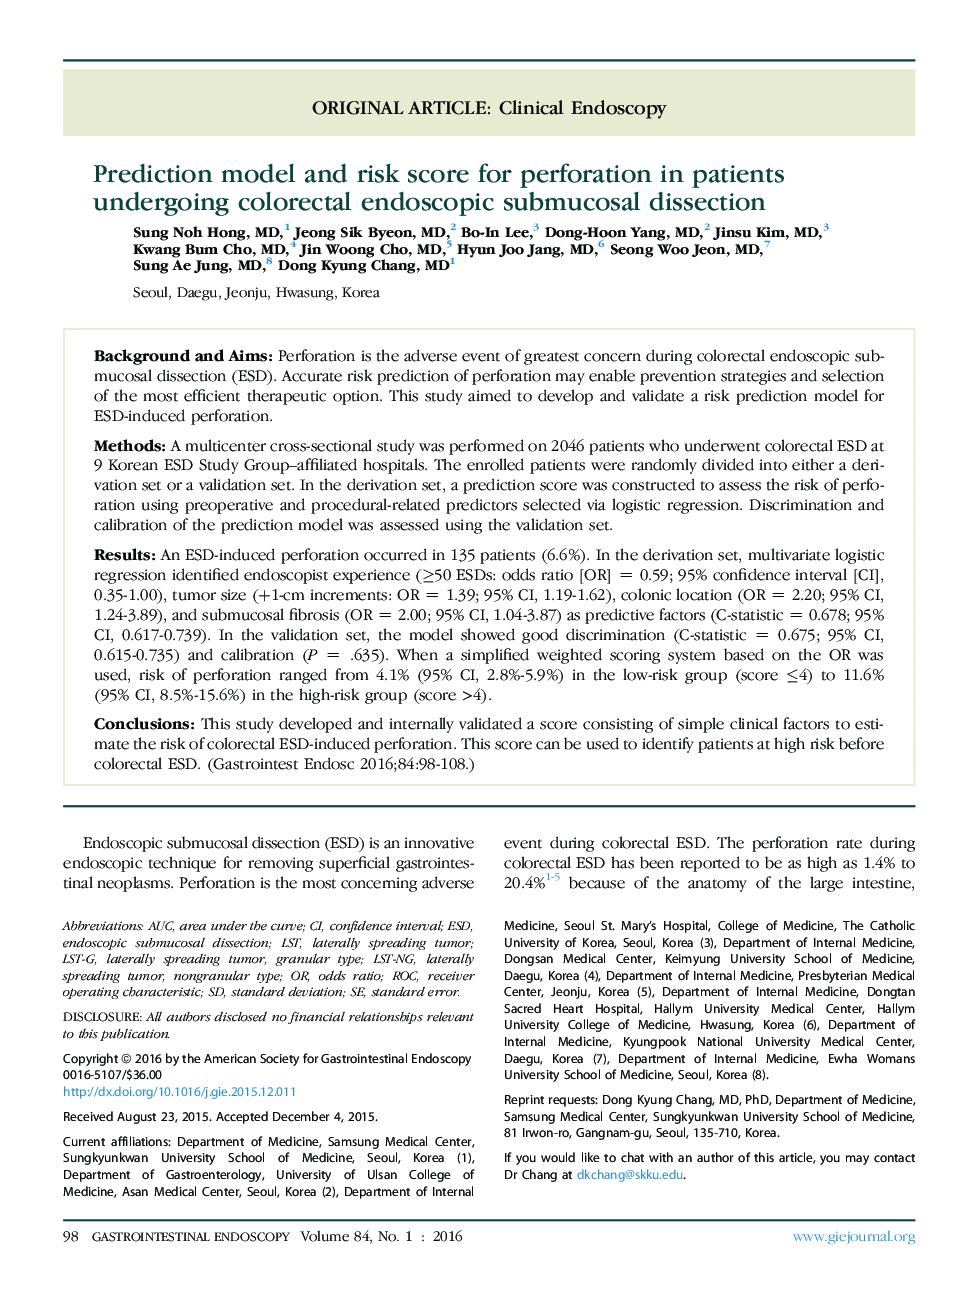 Original articleClinical endoscopyPrediction model and risk score for perforation in patients undergoing colorectal endoscopic submucosal dissection